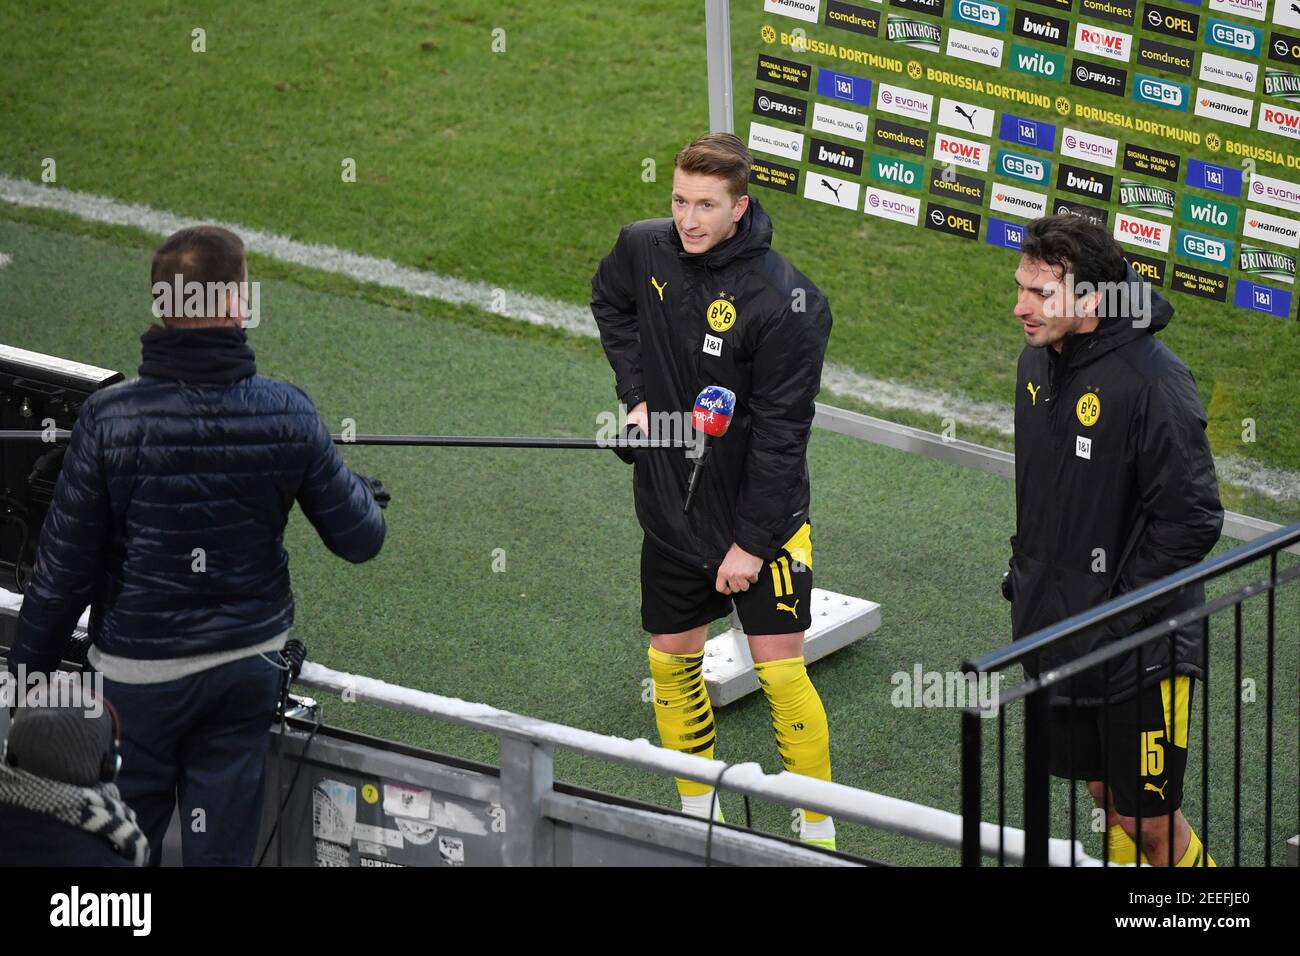 Marco REUS (DO) and Mats HUMMELS (DO) disappointed during the interview  after the game, Soccer 1. Bundesliga, 21st matchday, Borussia Dortmund (DO)  - TSG 1899 Hoffenheim (1899) 2: 2, on September 19,